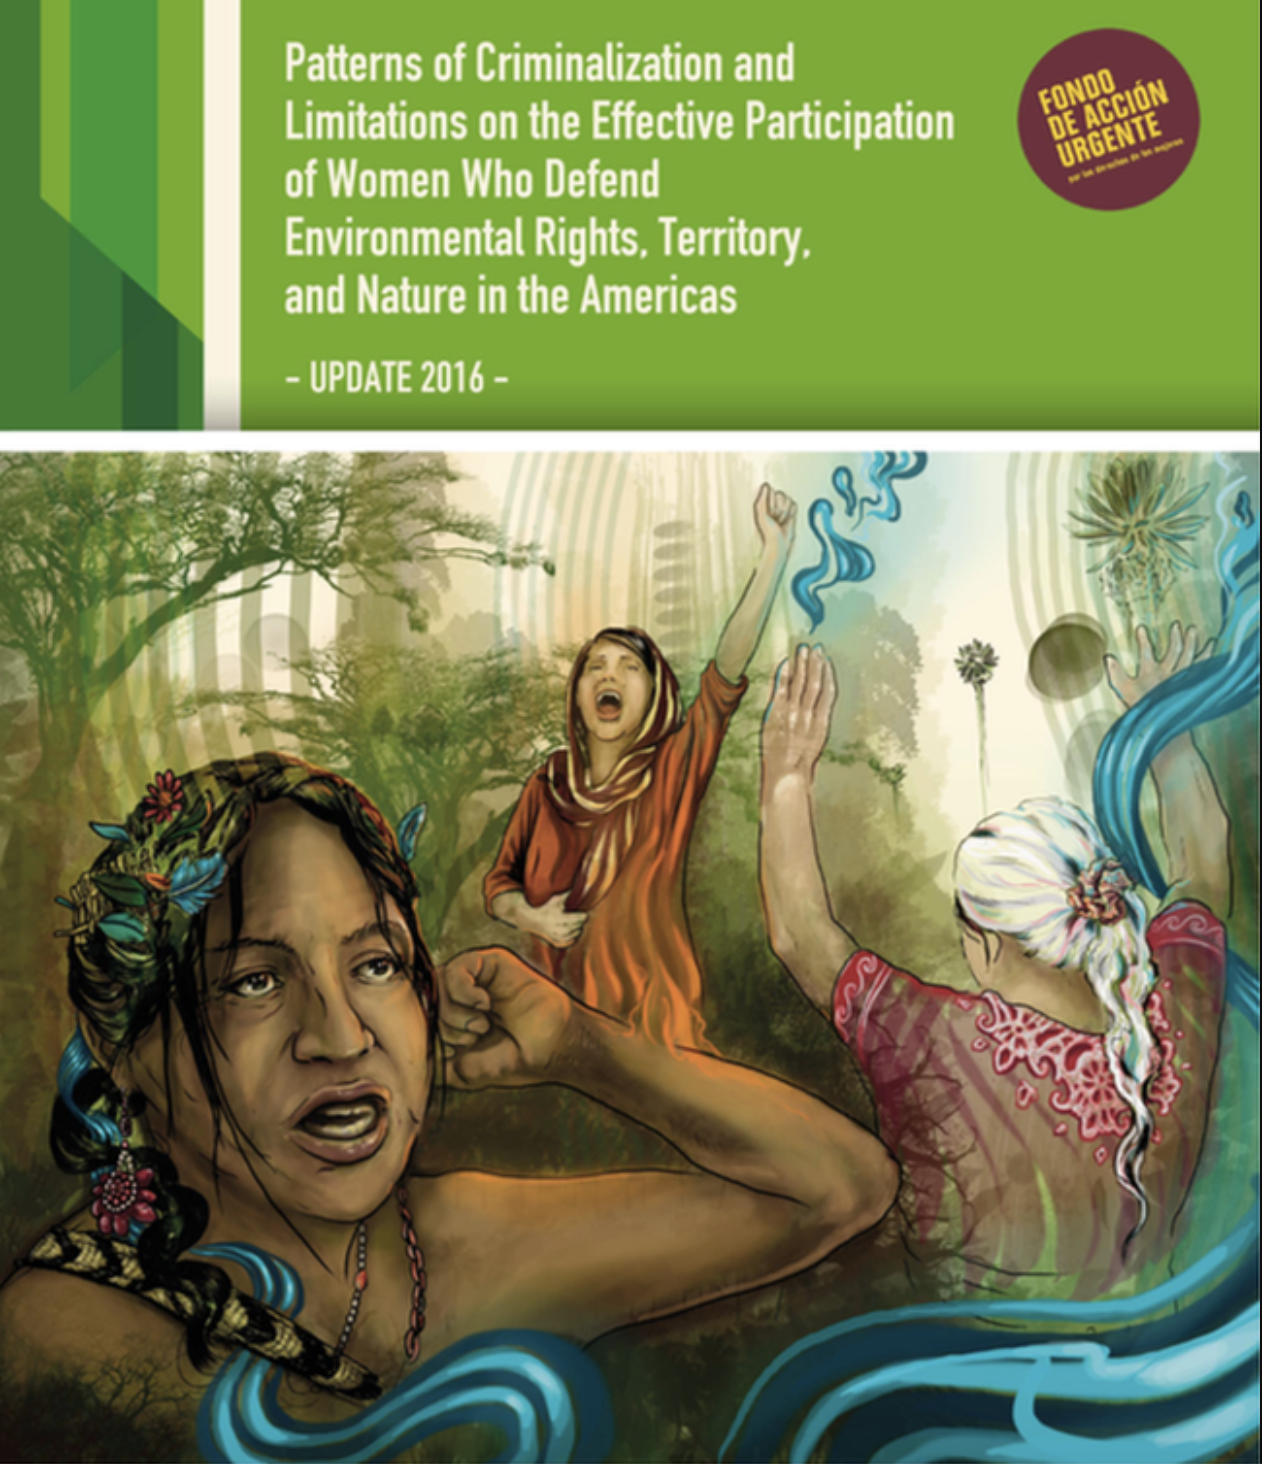 Patterns of criminalization and limitations on the effective participation of women who defend environmental rights, territoy and nature in the Americas.